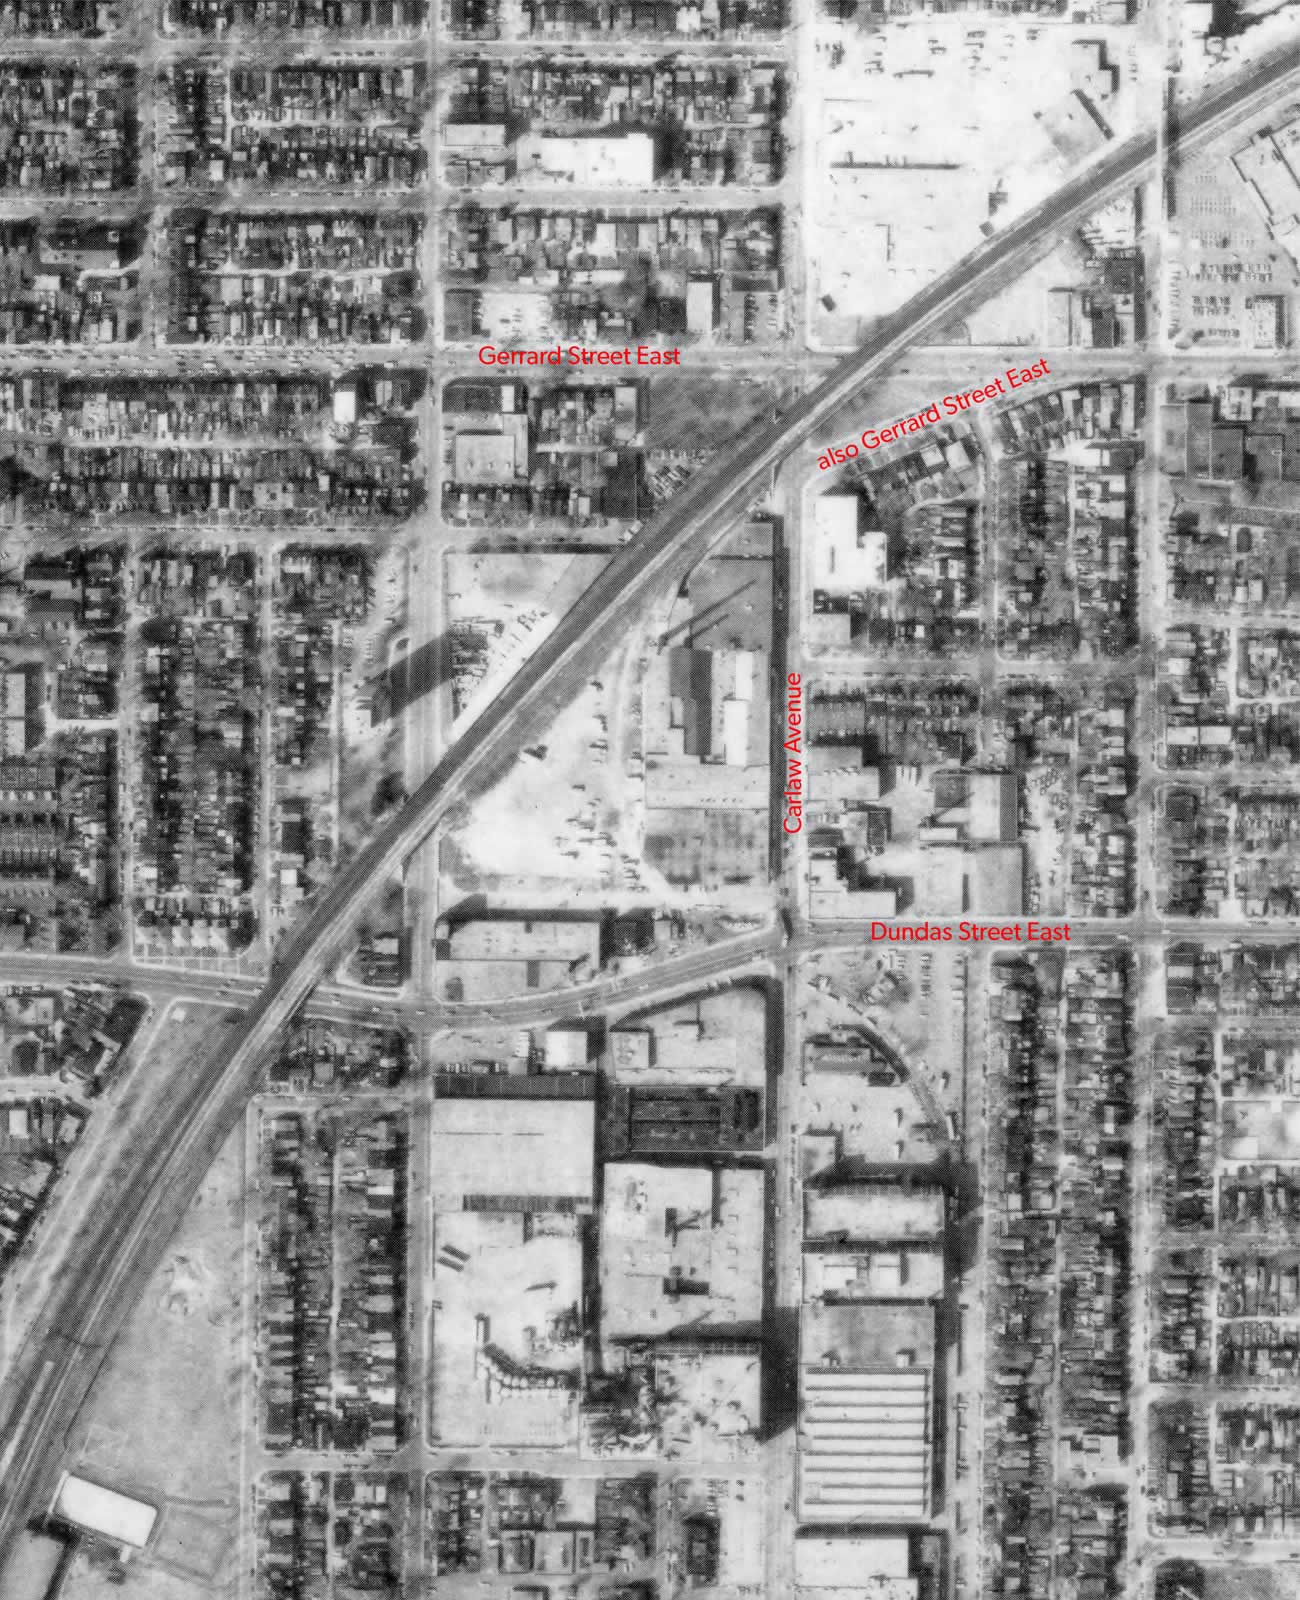 Aerial map of the Dundas and Carlaw neighbourhood with street names in red, showing the two paths taken by Gerrard Street East when standing at 369 Carlaw Avenue.